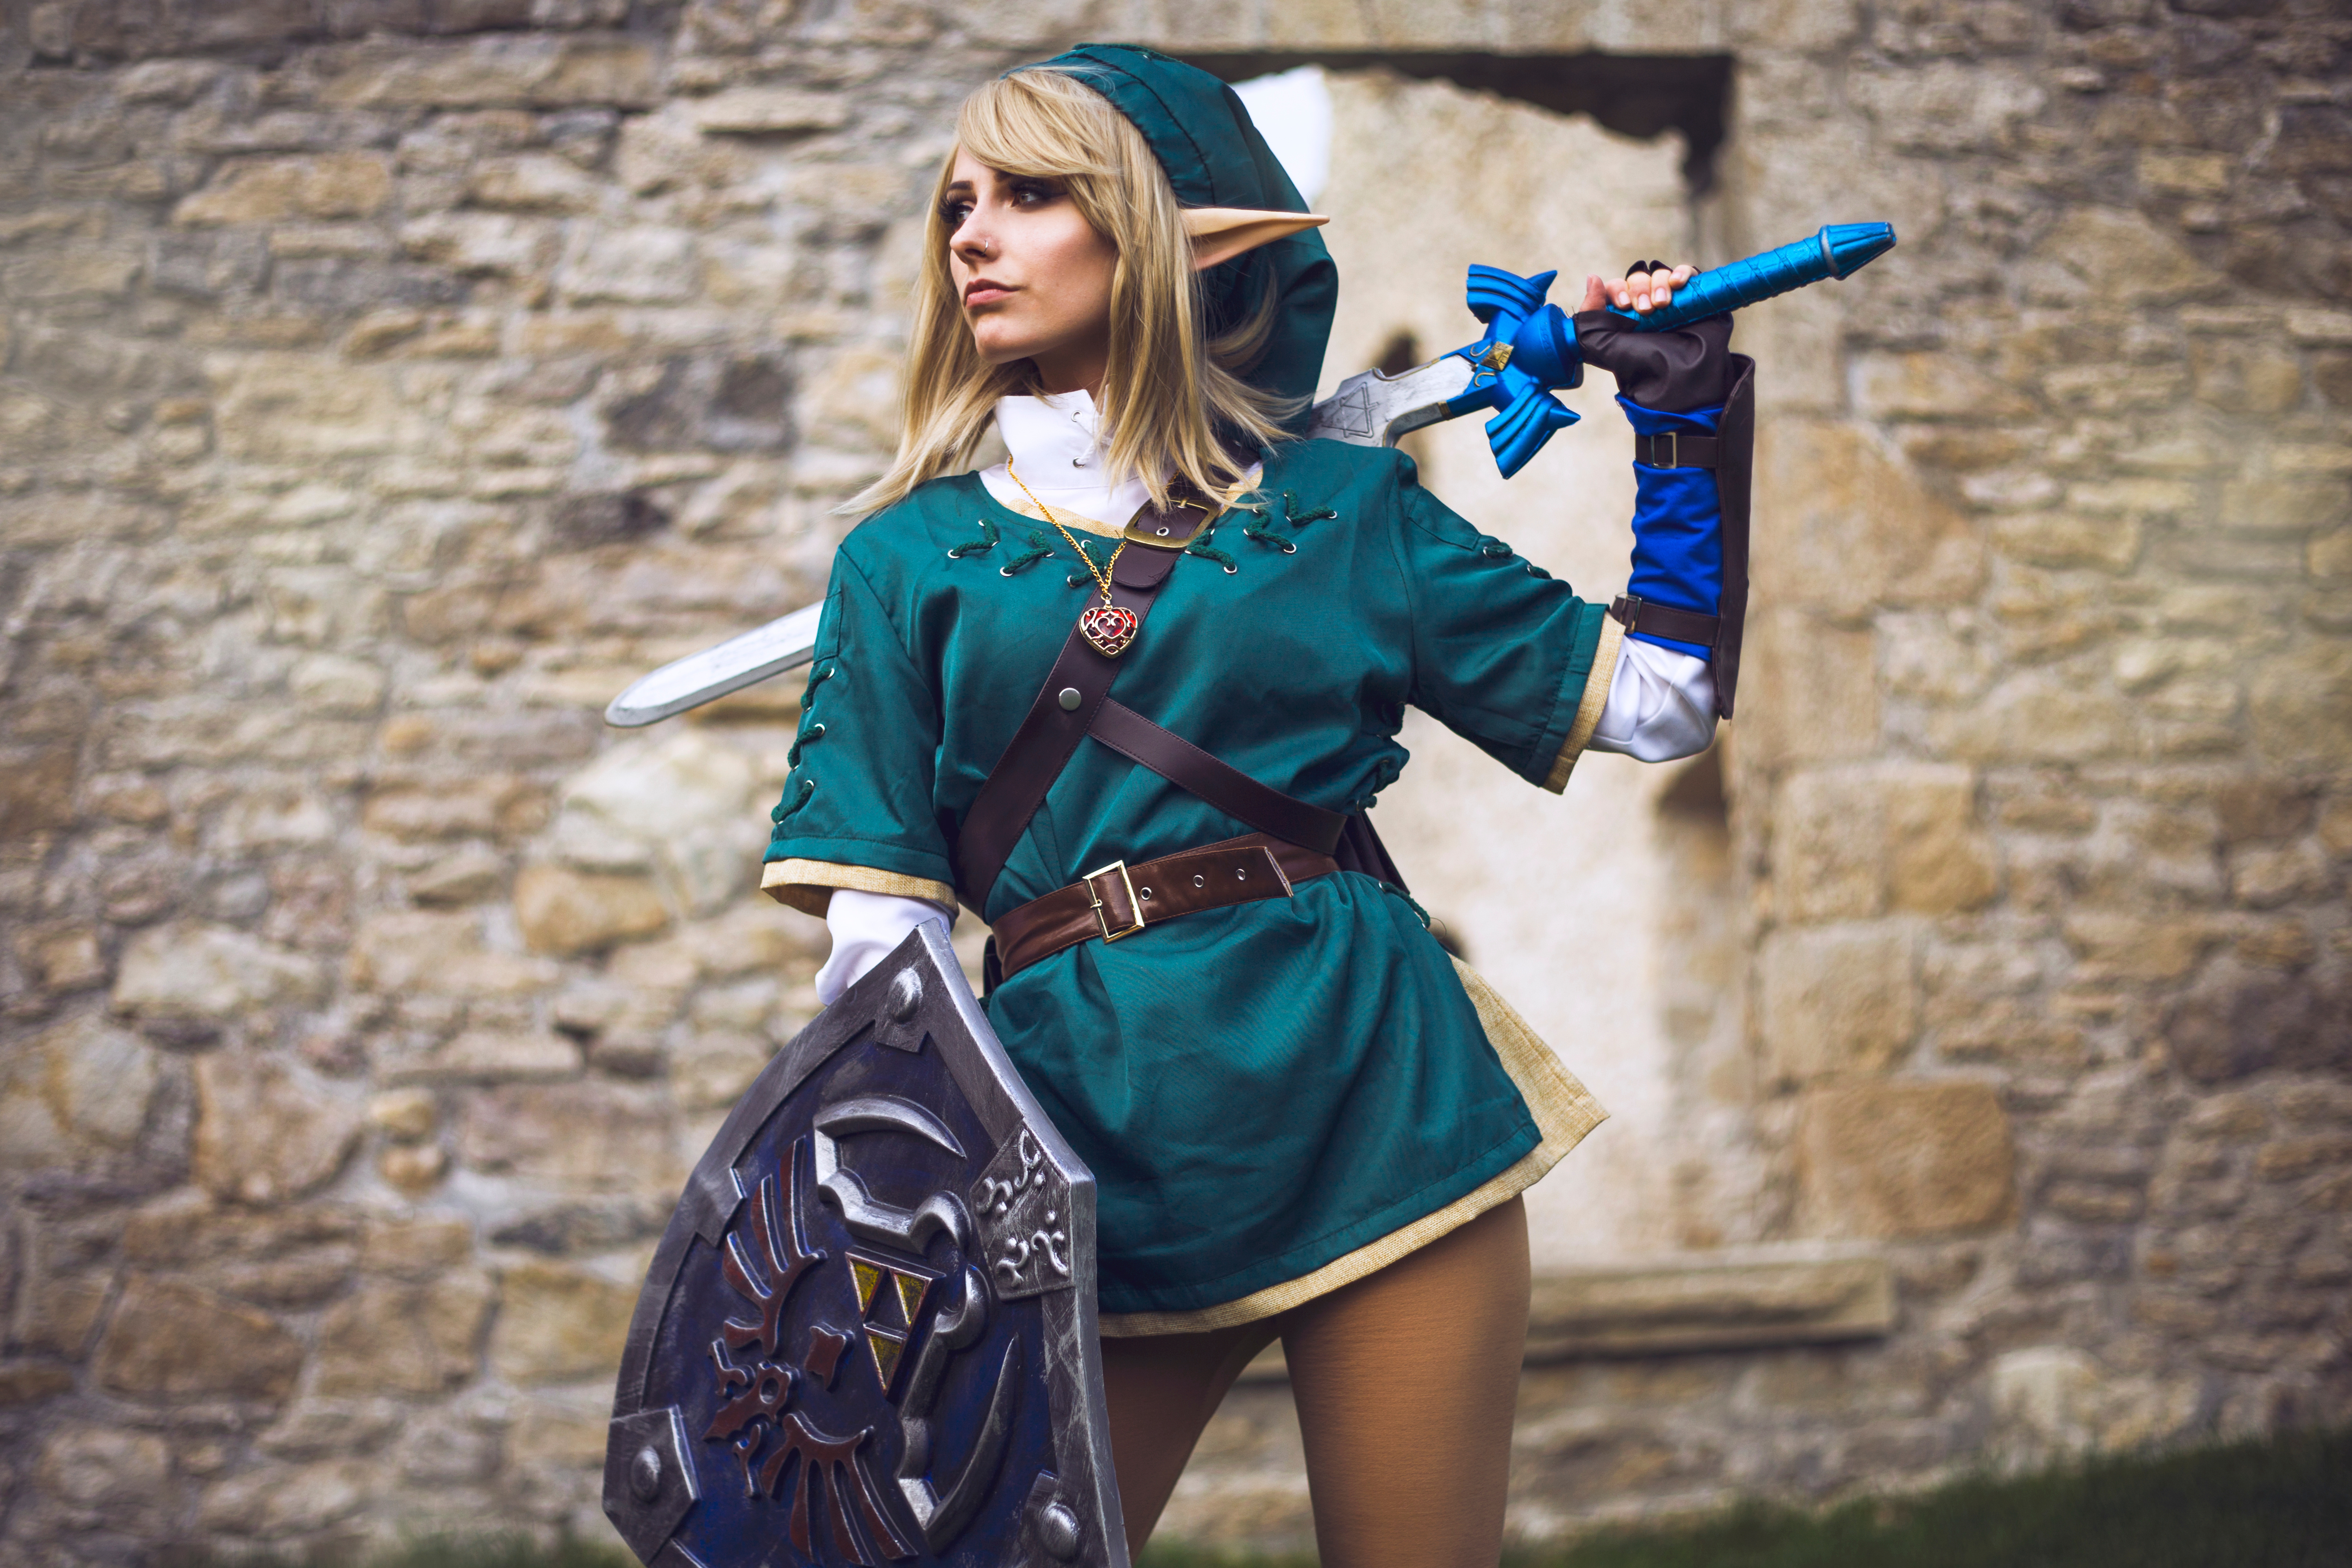 People 6405x4270 Taylor Bloxam women cosplay The Legend of Zelda Link sword shield pointy ears looking away medallion model nose ring video game characters women with swords girls with guns women outdoors blonde green tunic